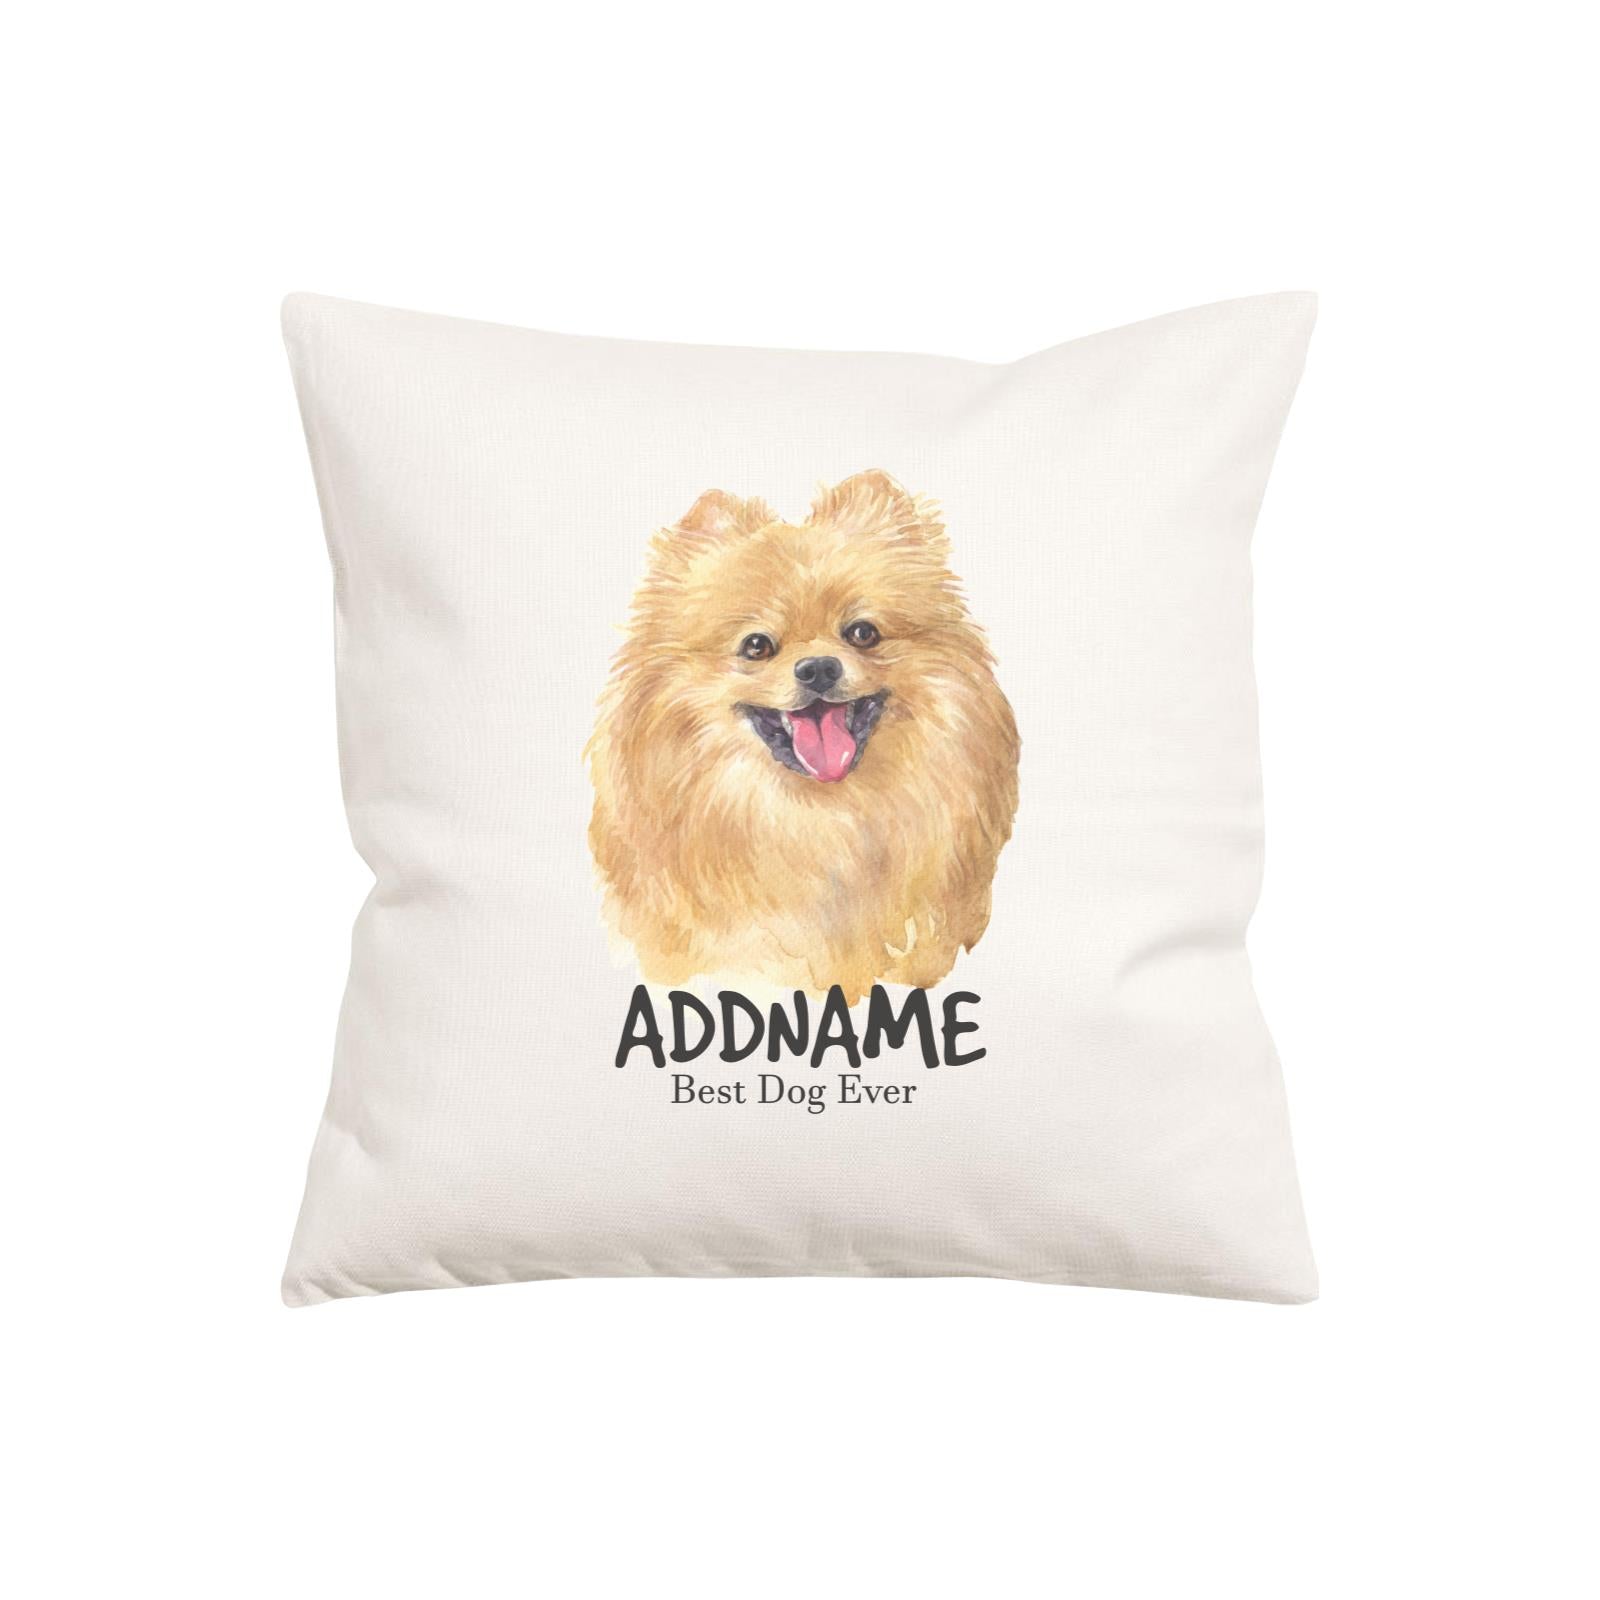 Watercolor Dog Series Pomeranian Happy Best Dog Ever Addname Pillow Cushion